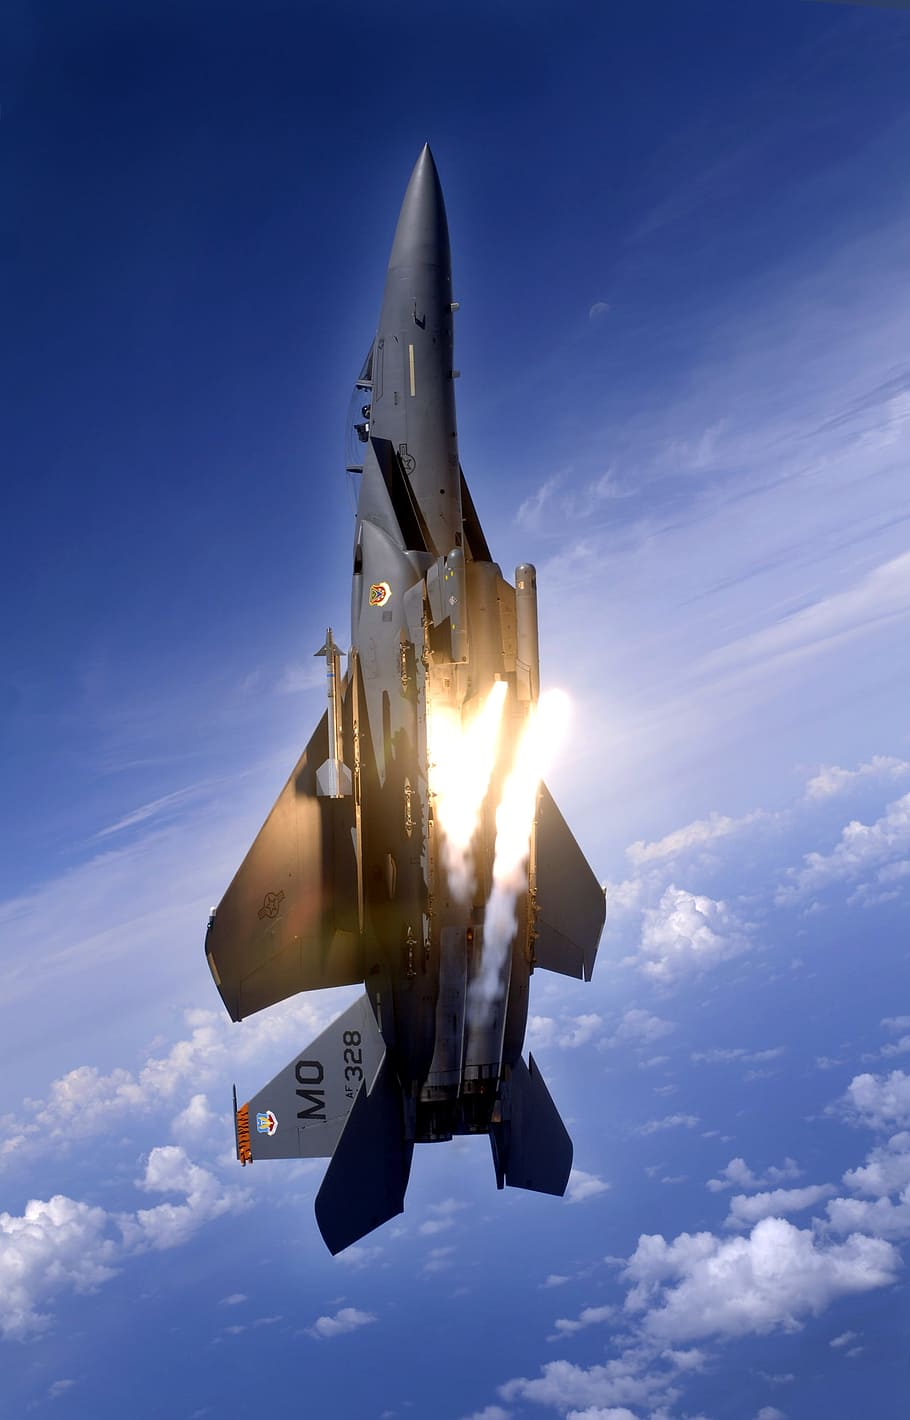 gray, f-15, f -15 fighter jet, Jet, Fighter, Vertical, Climb, Aircraft, jet, fighter, airplane